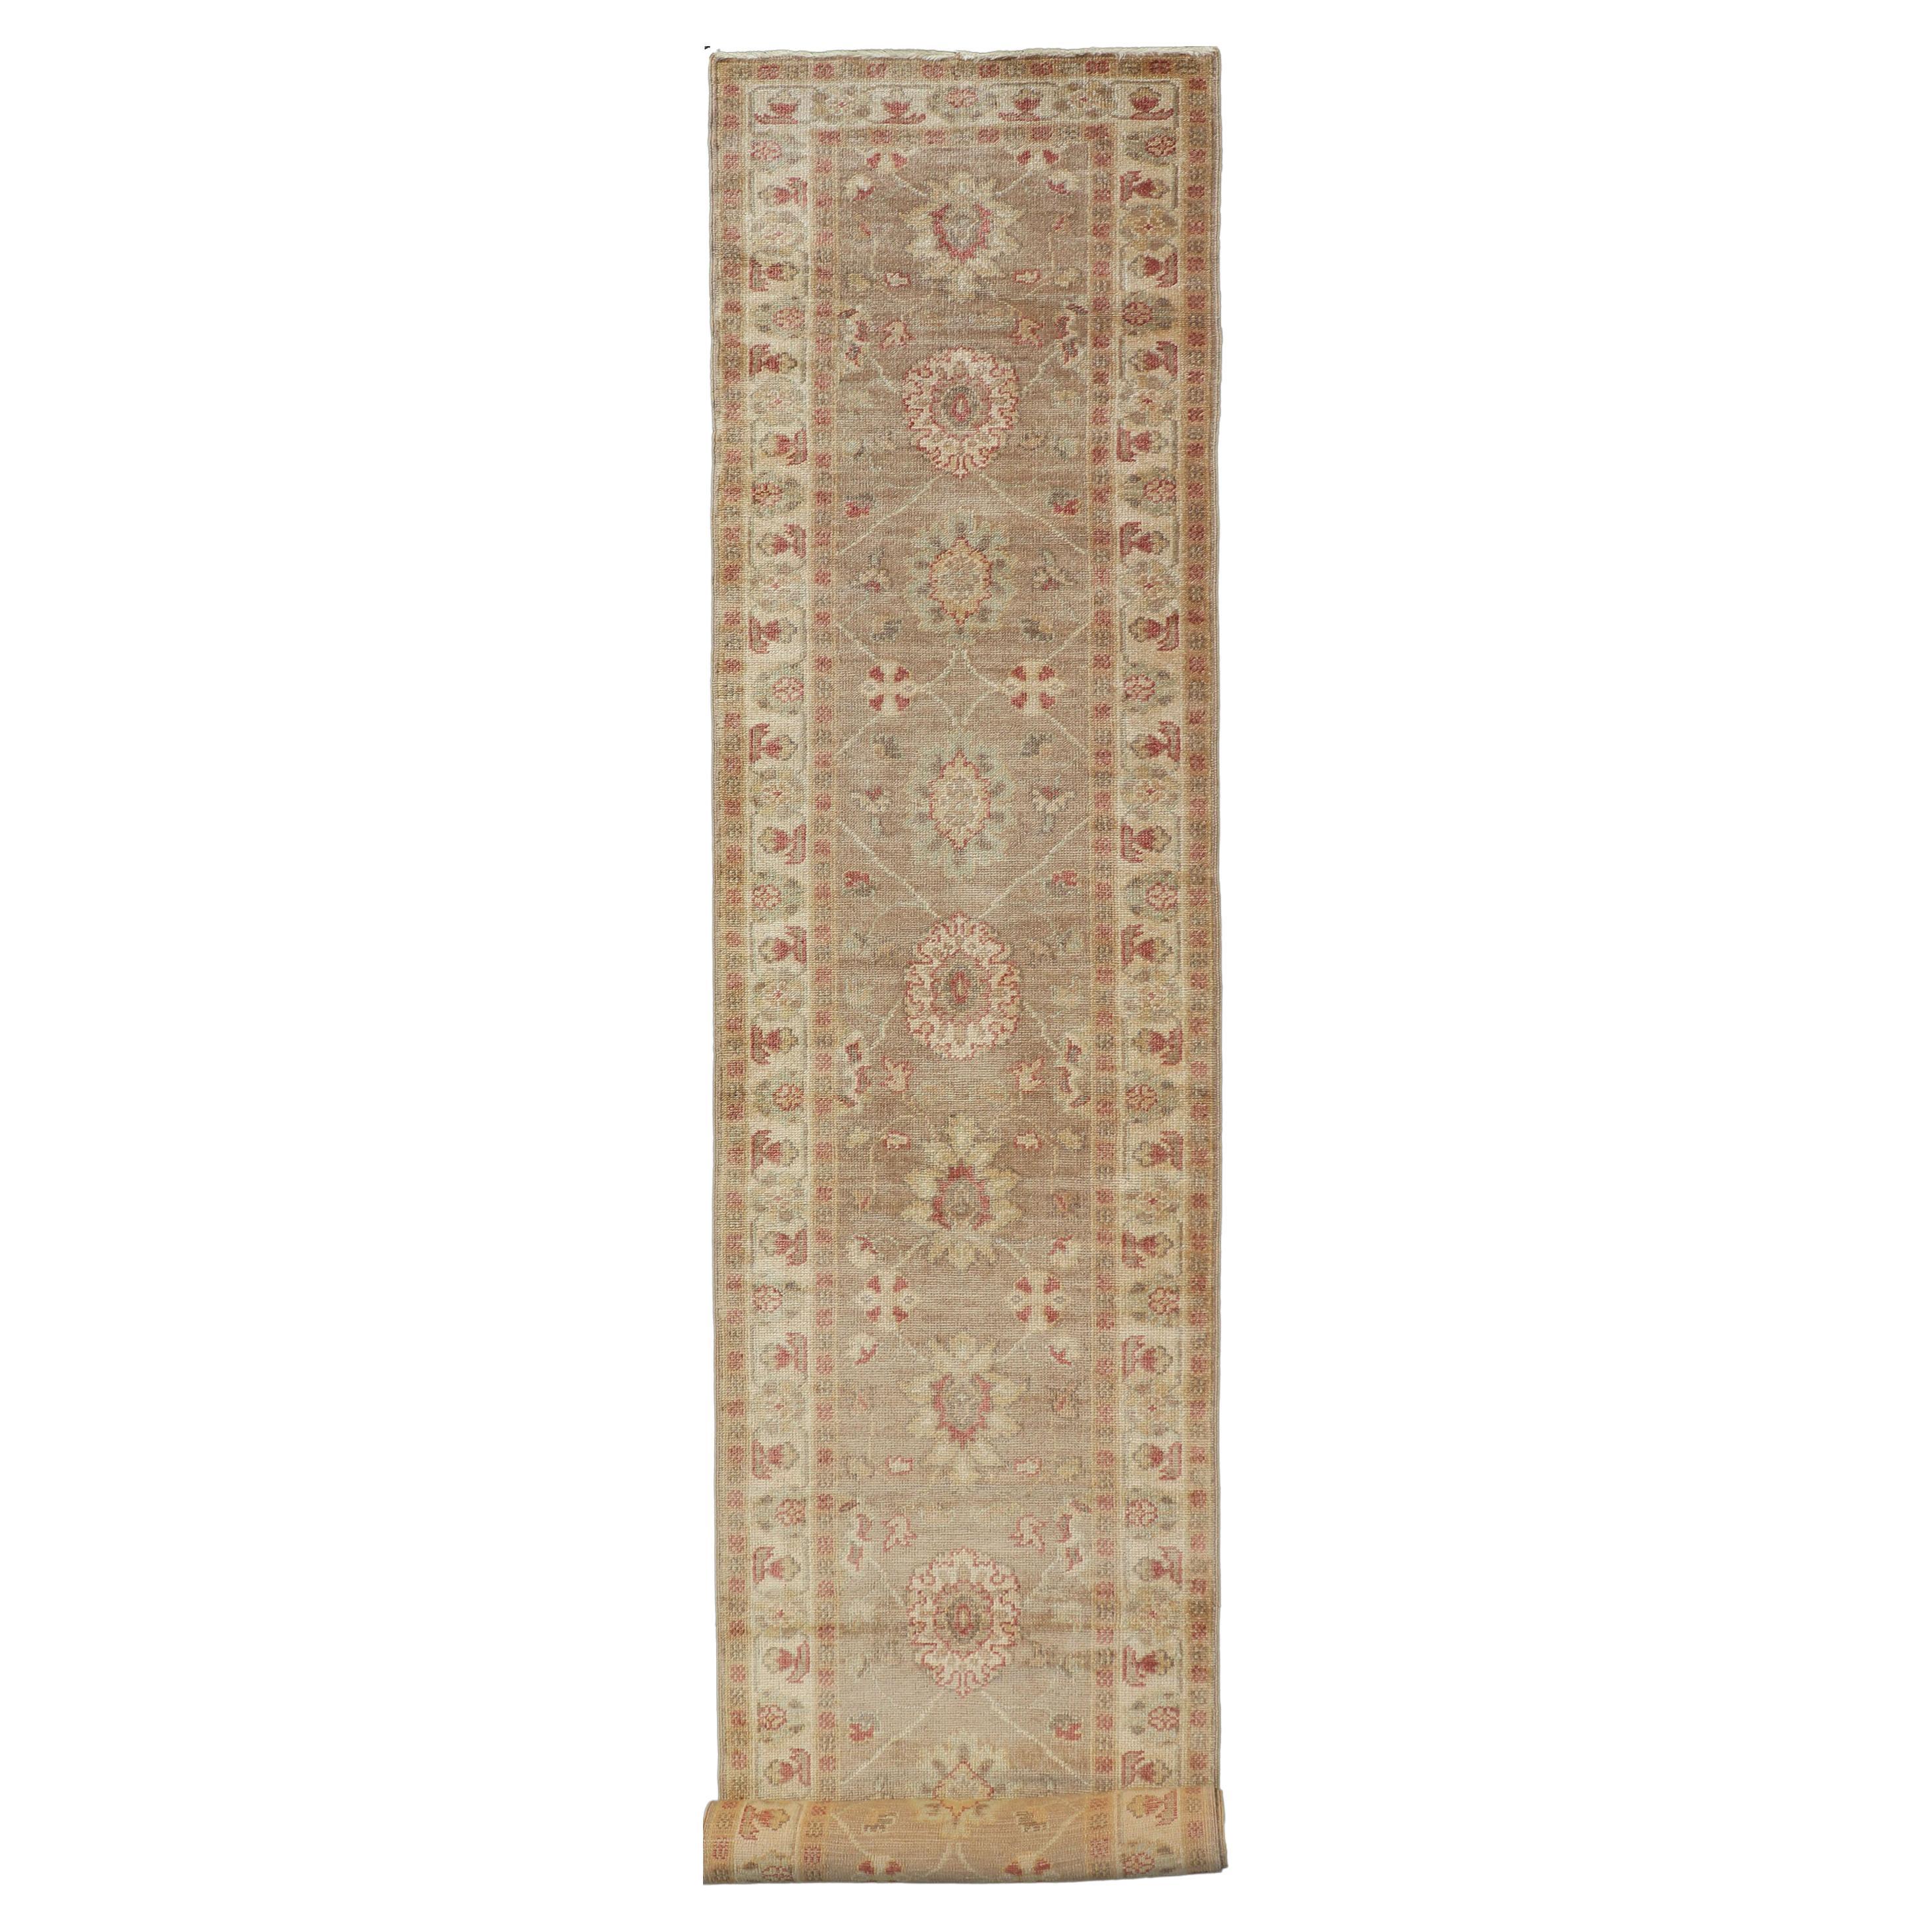 Long Turkish Oushak Runner with All-Over Design in Light Brown, Tan & Red